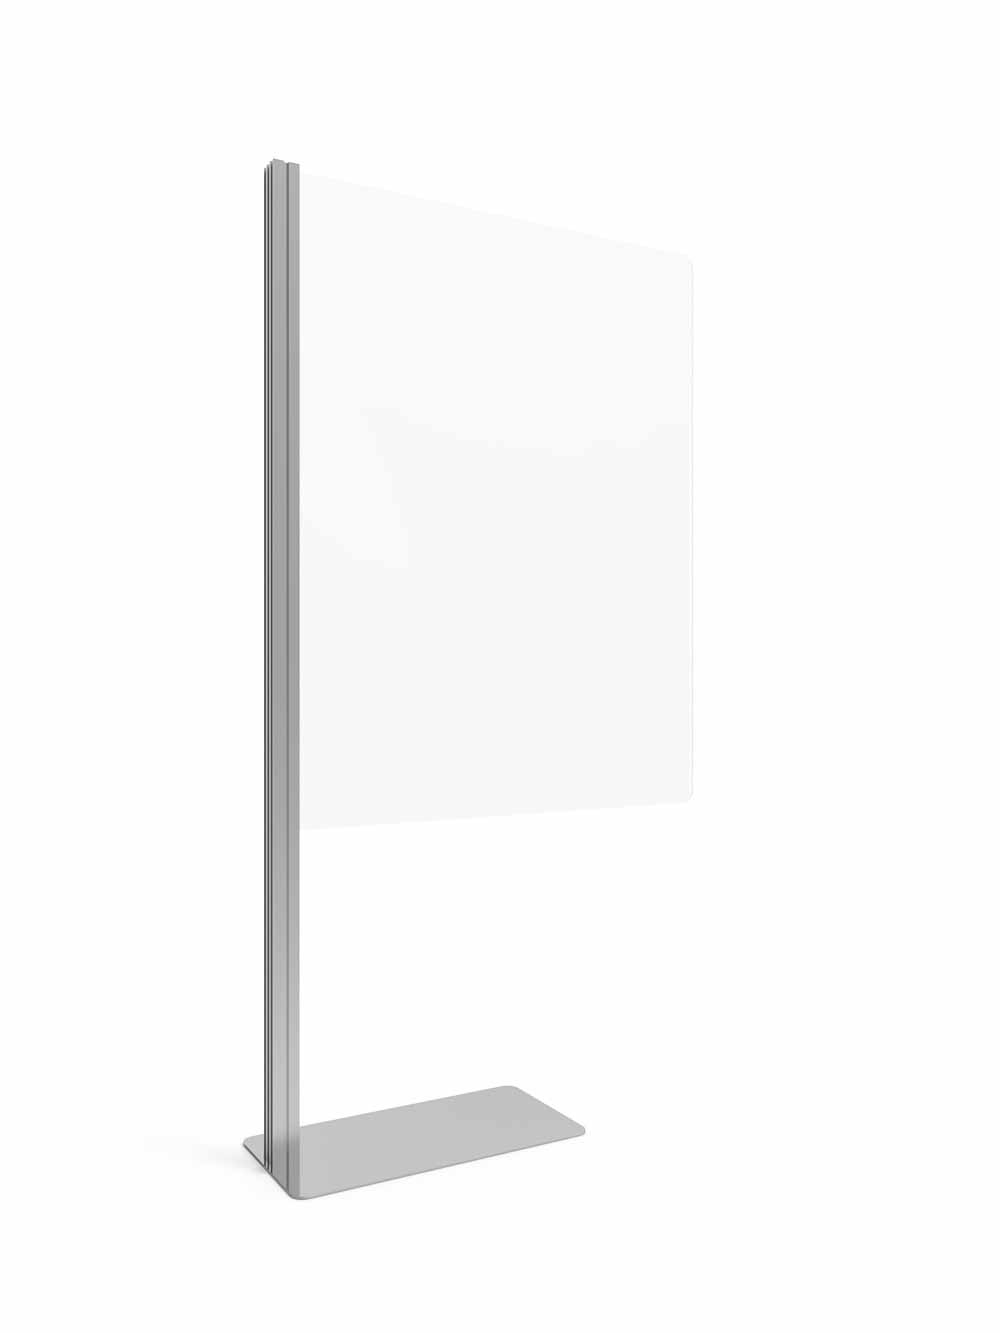 Luxor Acrylic sneeze guards 1-Panel Clear Polypropylene Contemporary/Modern  Style Room Divider in the Room Dividers department at